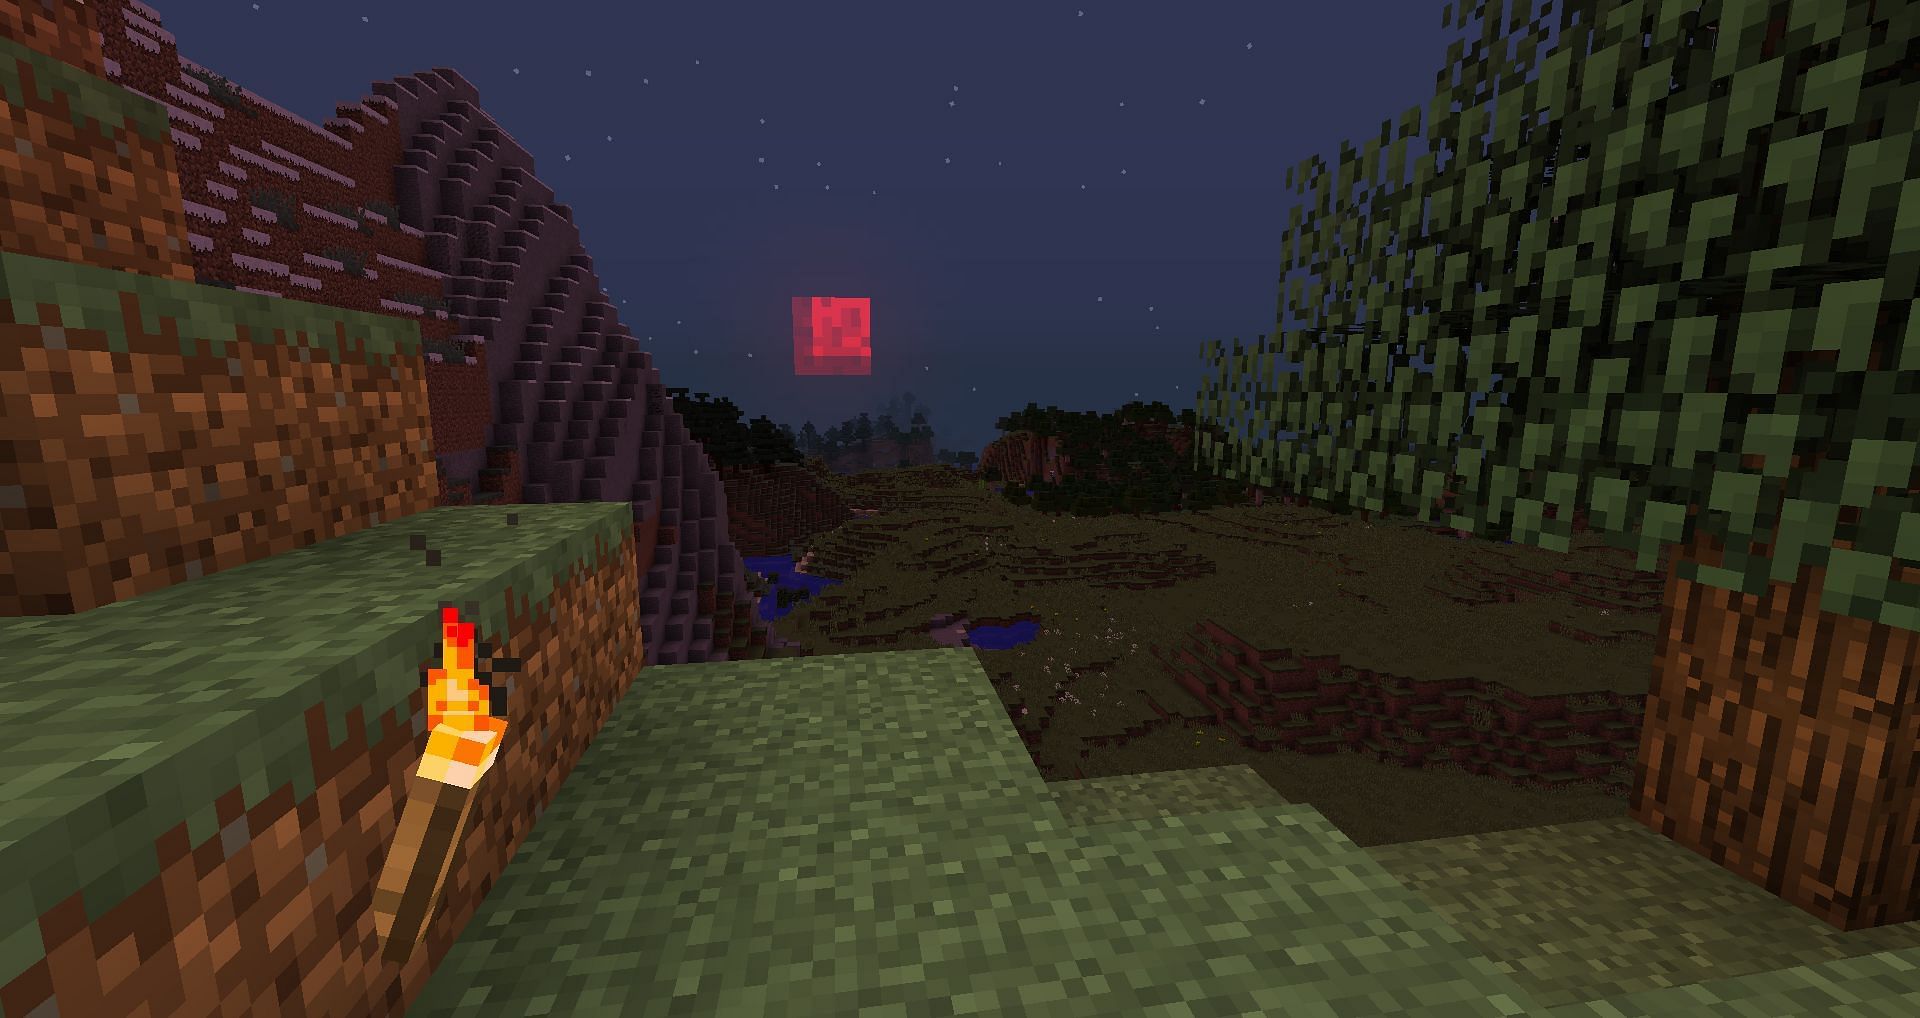 Bloodmoon will rise in Minecraft, giving a spooky feel to the players (Image via CurseForge)